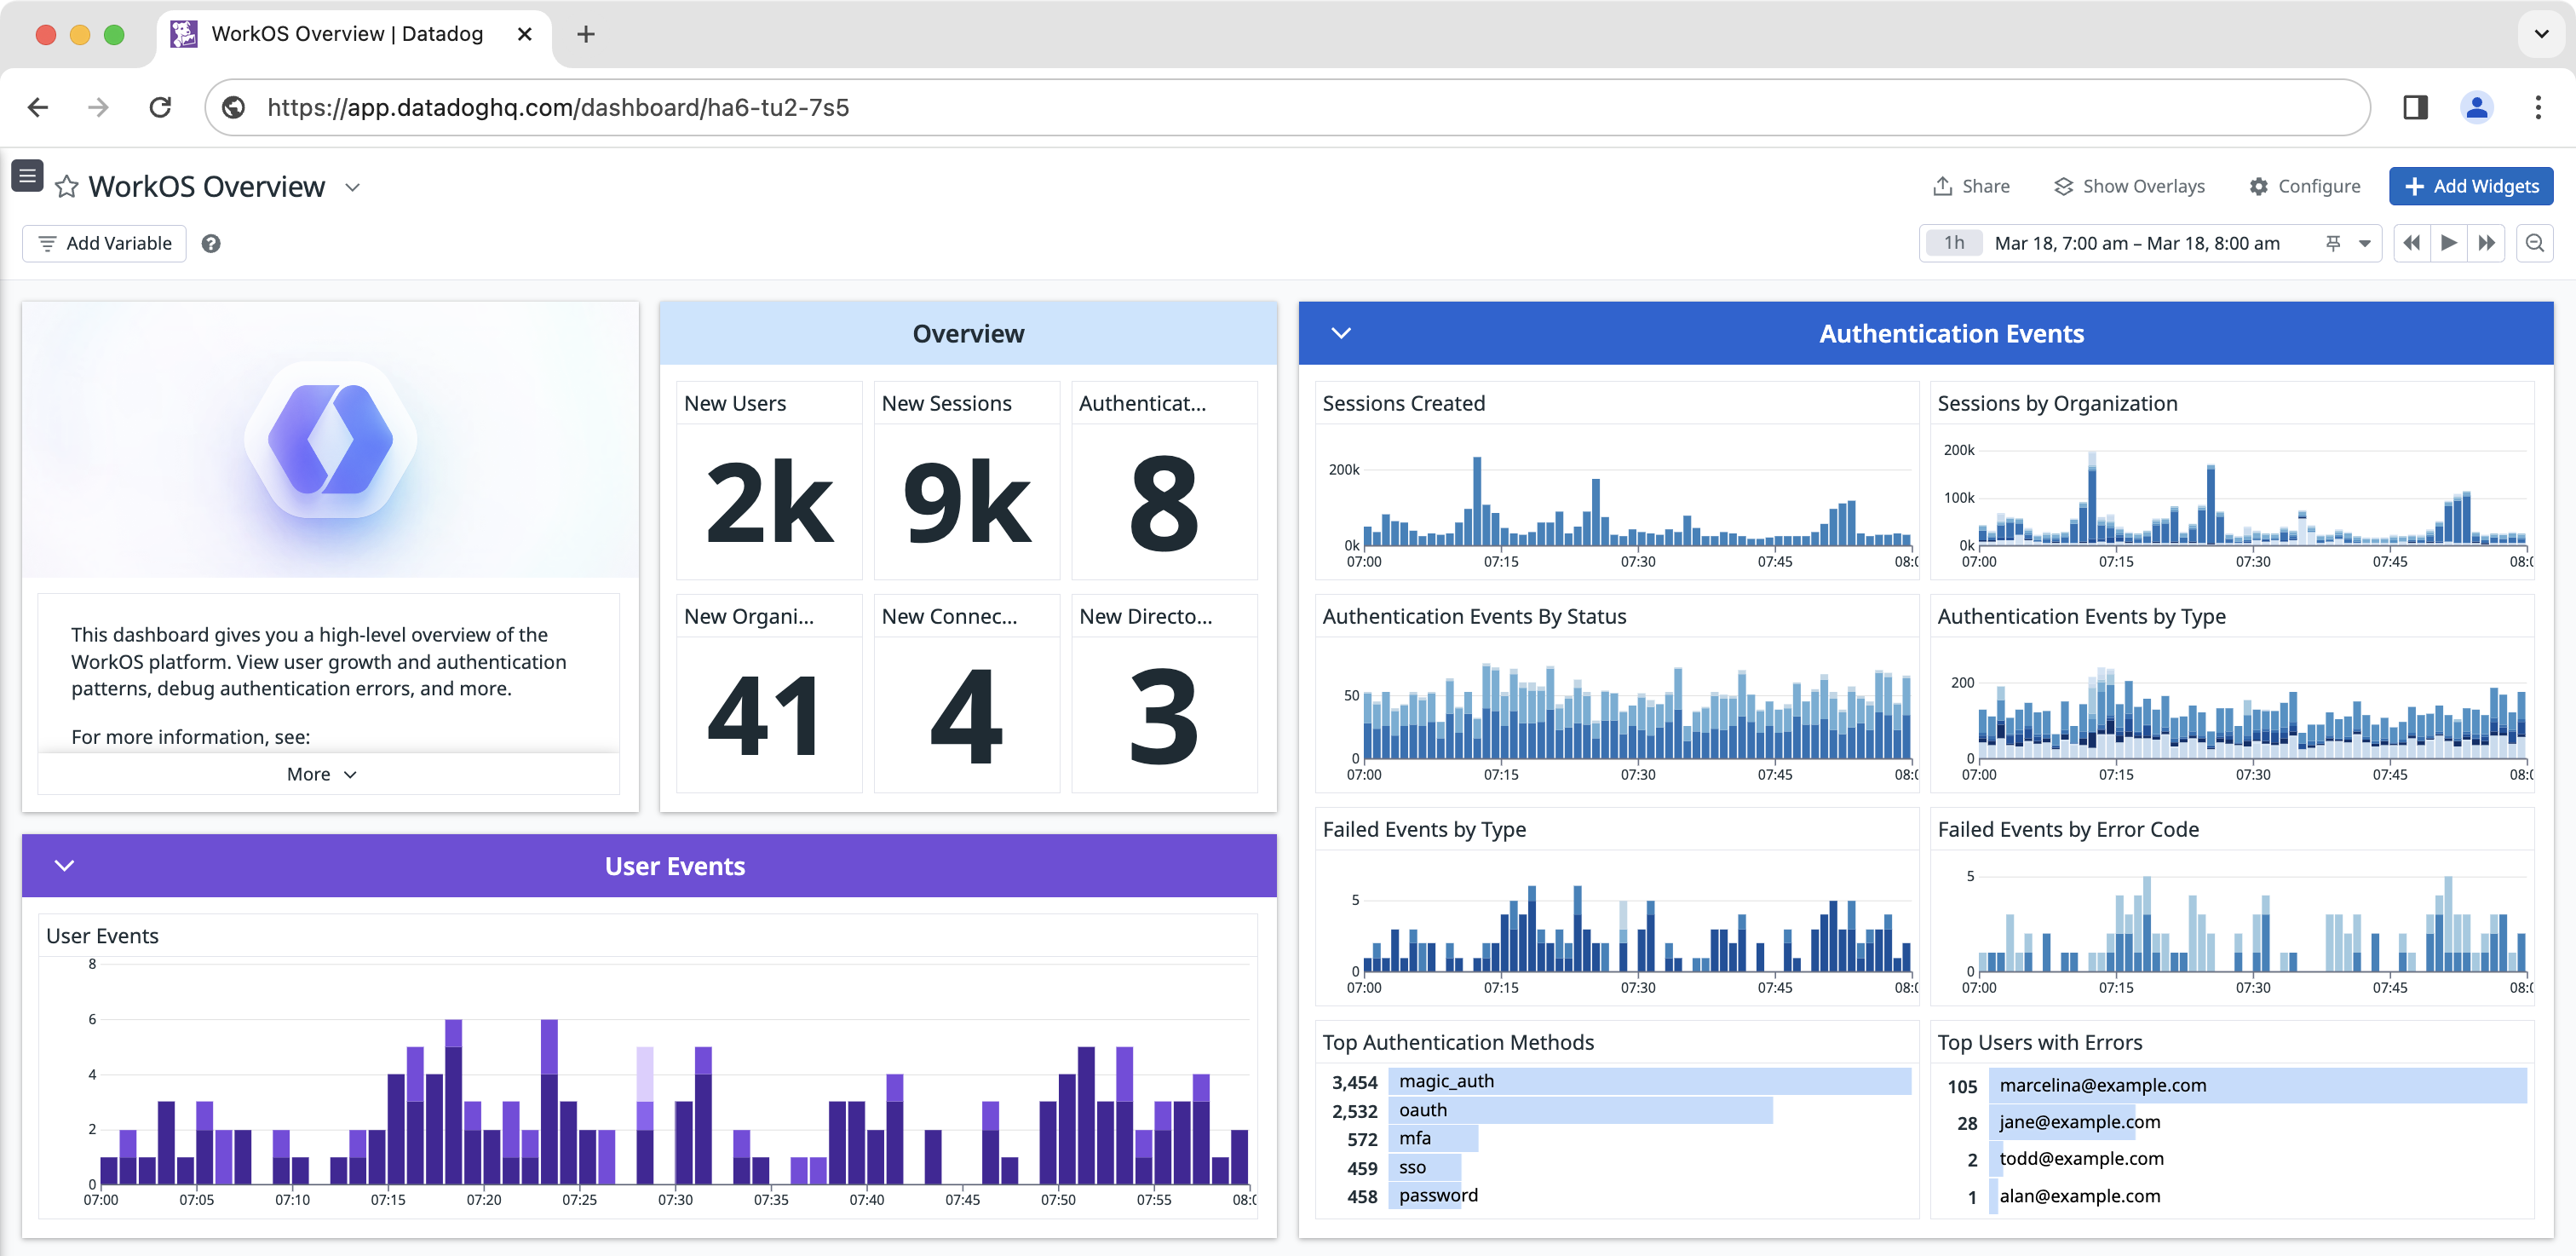 WorkOS Datadog dashboard showing various metrics and graphs describing authentication events and user activity